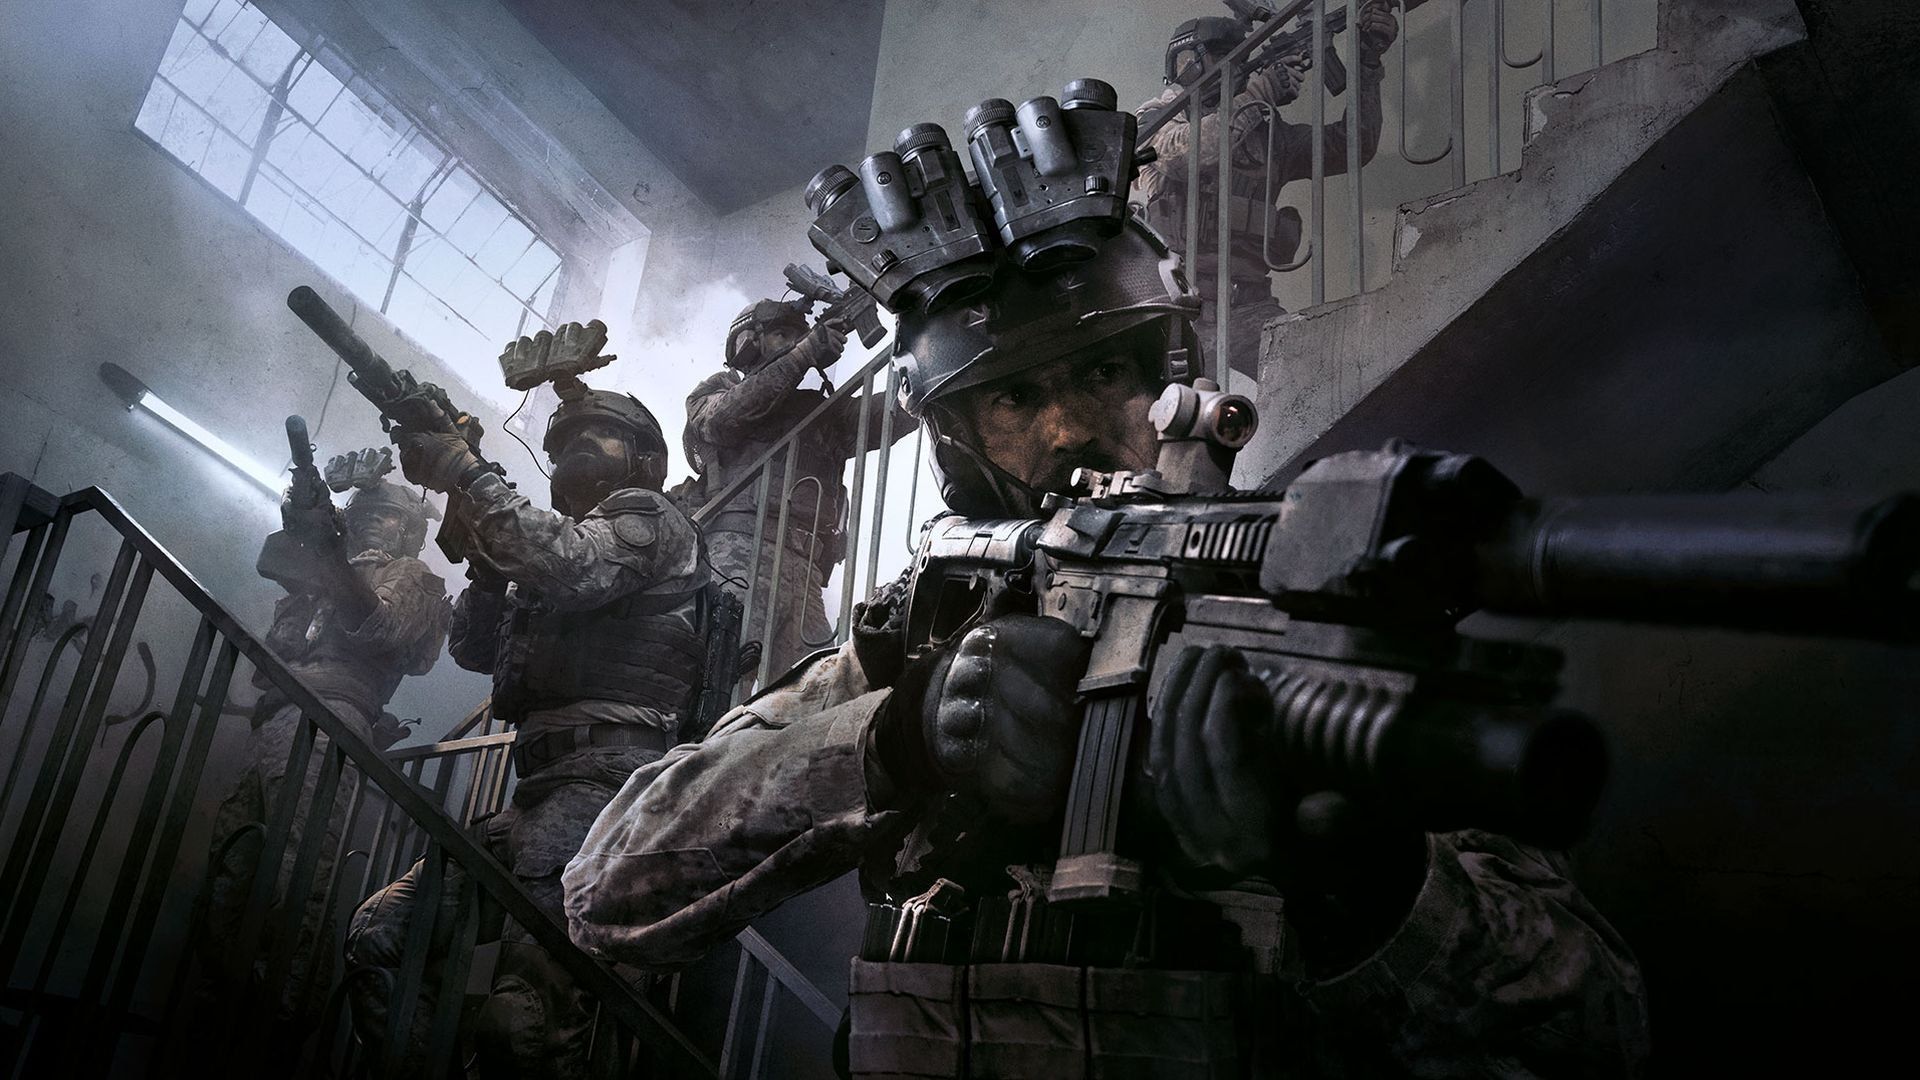 Play Call of Duty: Modern Warfare Multiplayer for Free This